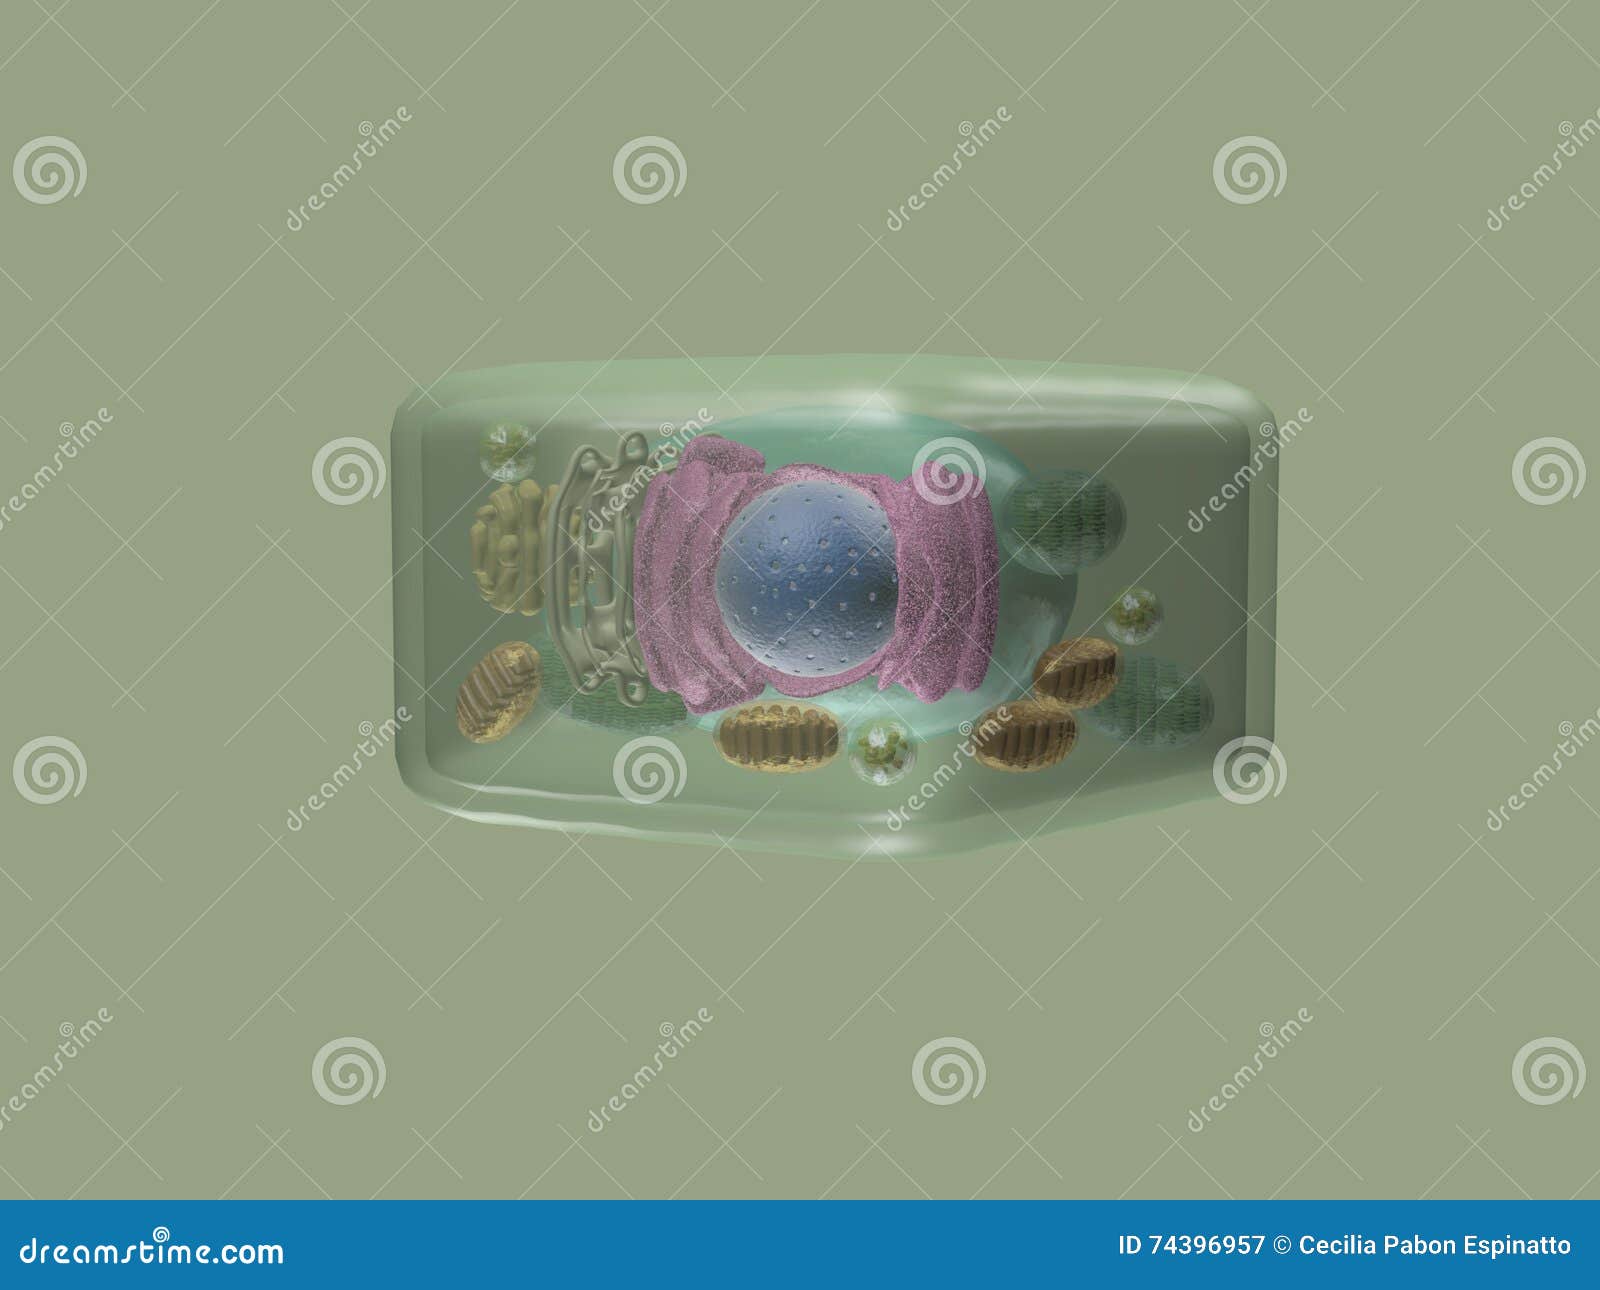 plant cell side view